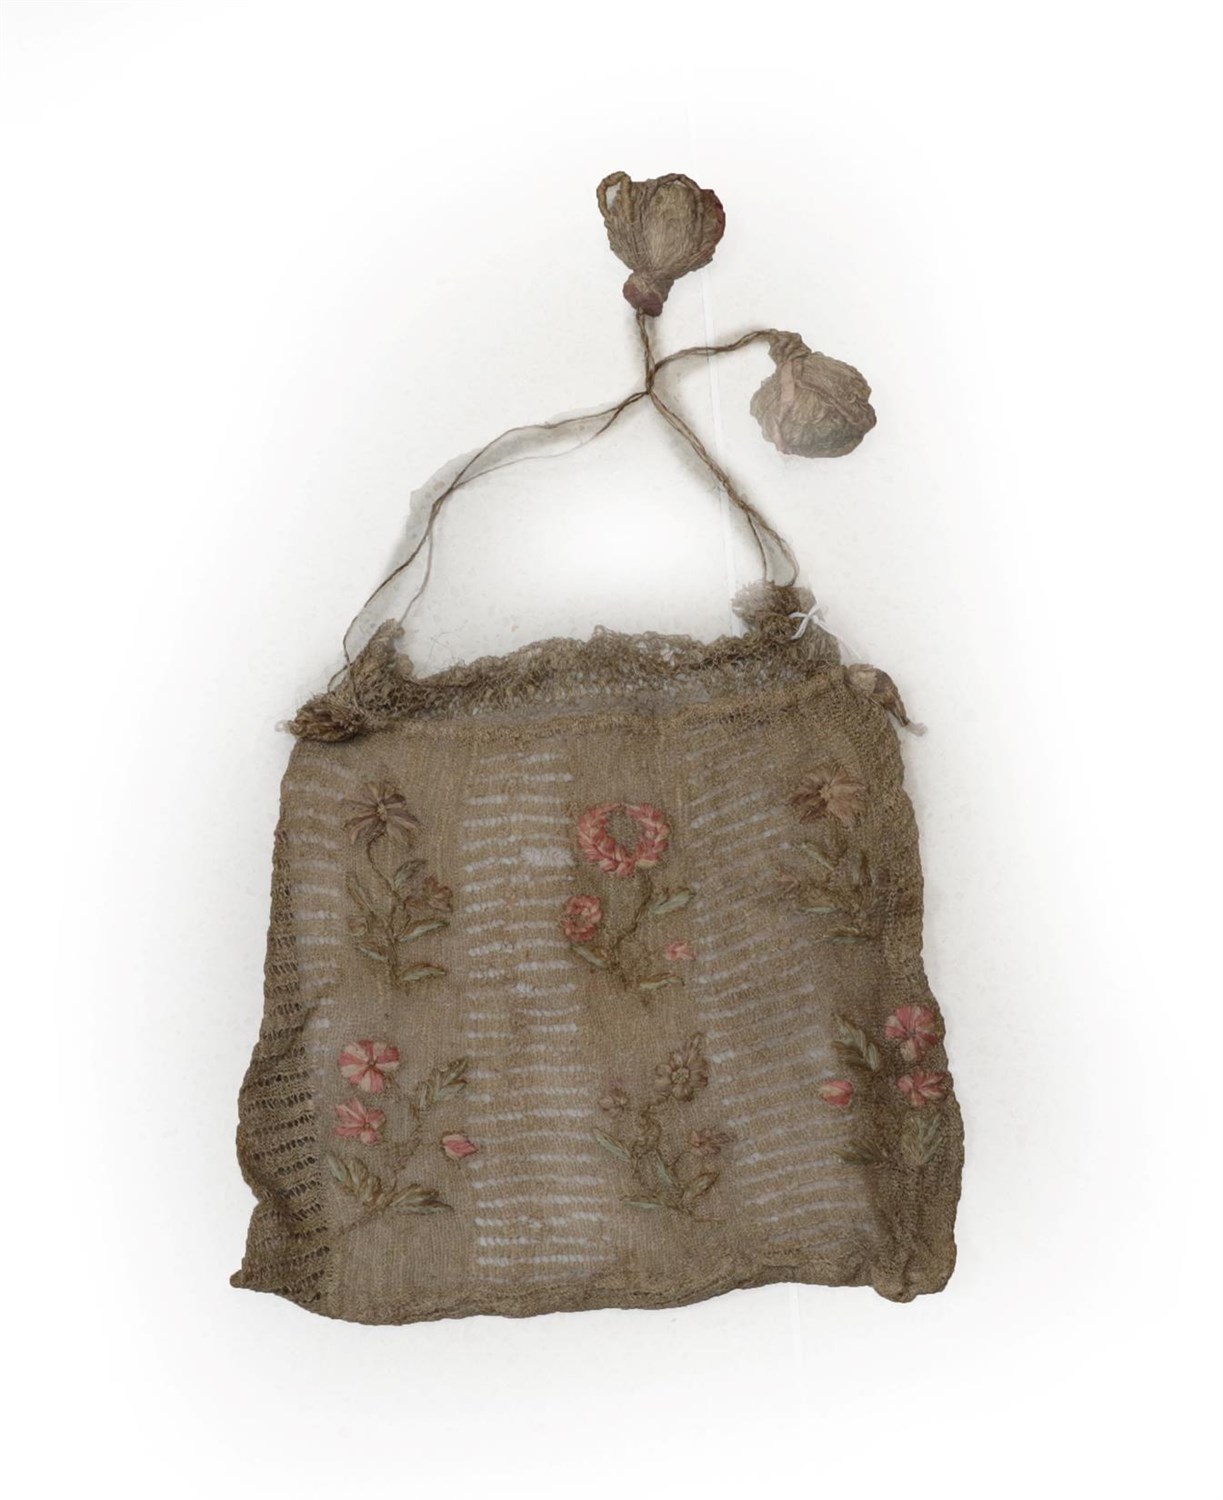 Lot 6071 - 18th Century Pineapple Fibre Knitted Workbag decorated with floral sprays to the front and back...